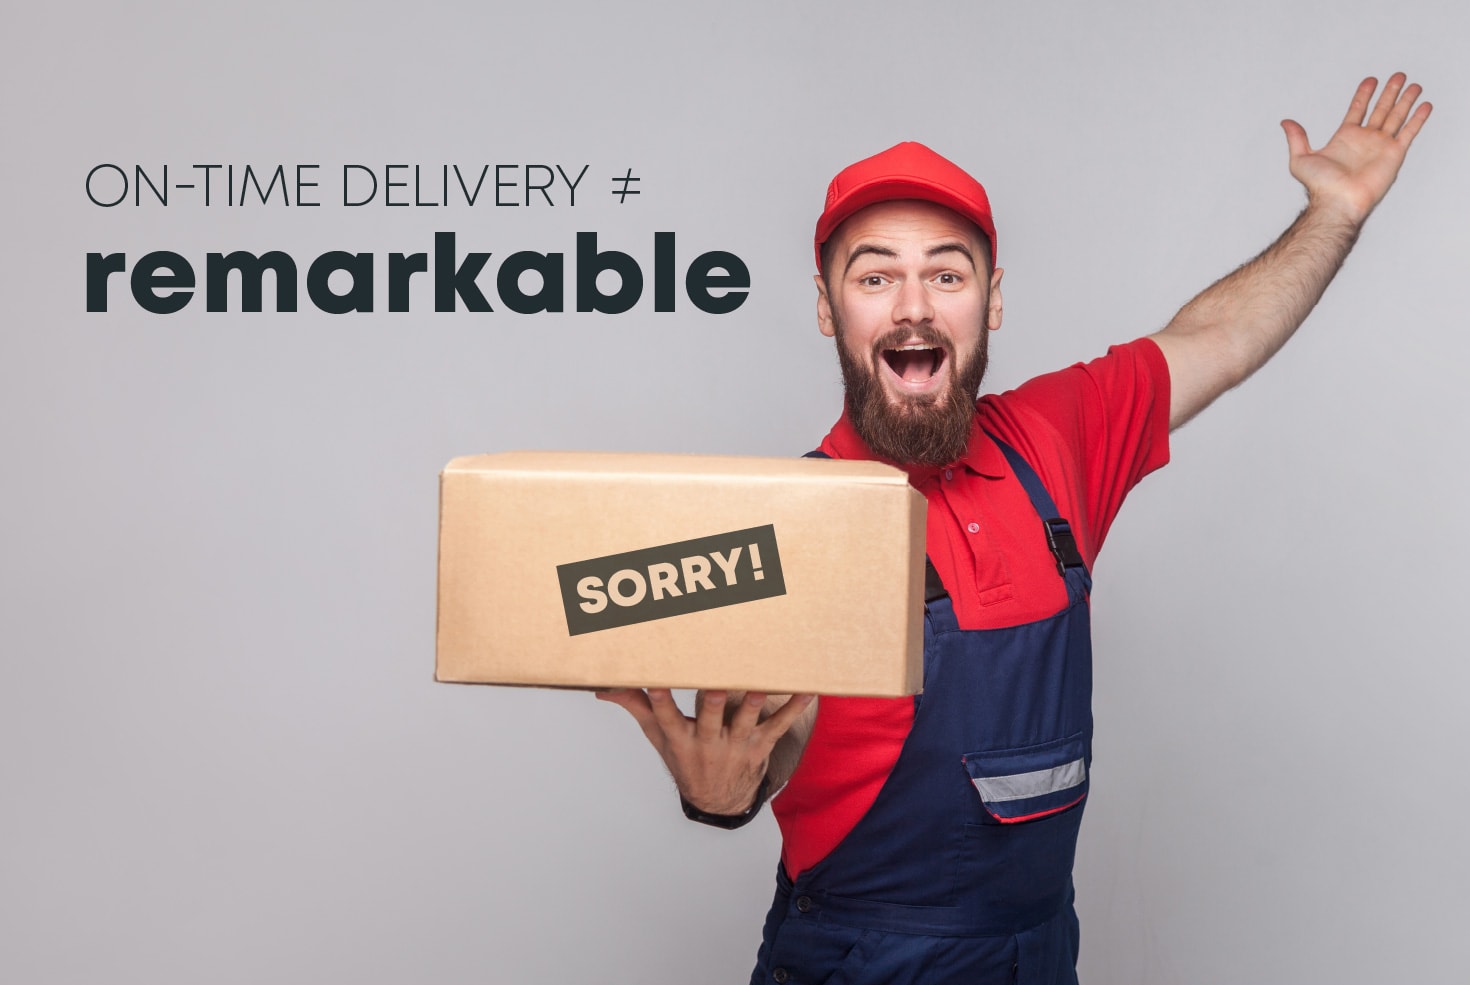 On-time delivery ≠ remarkable